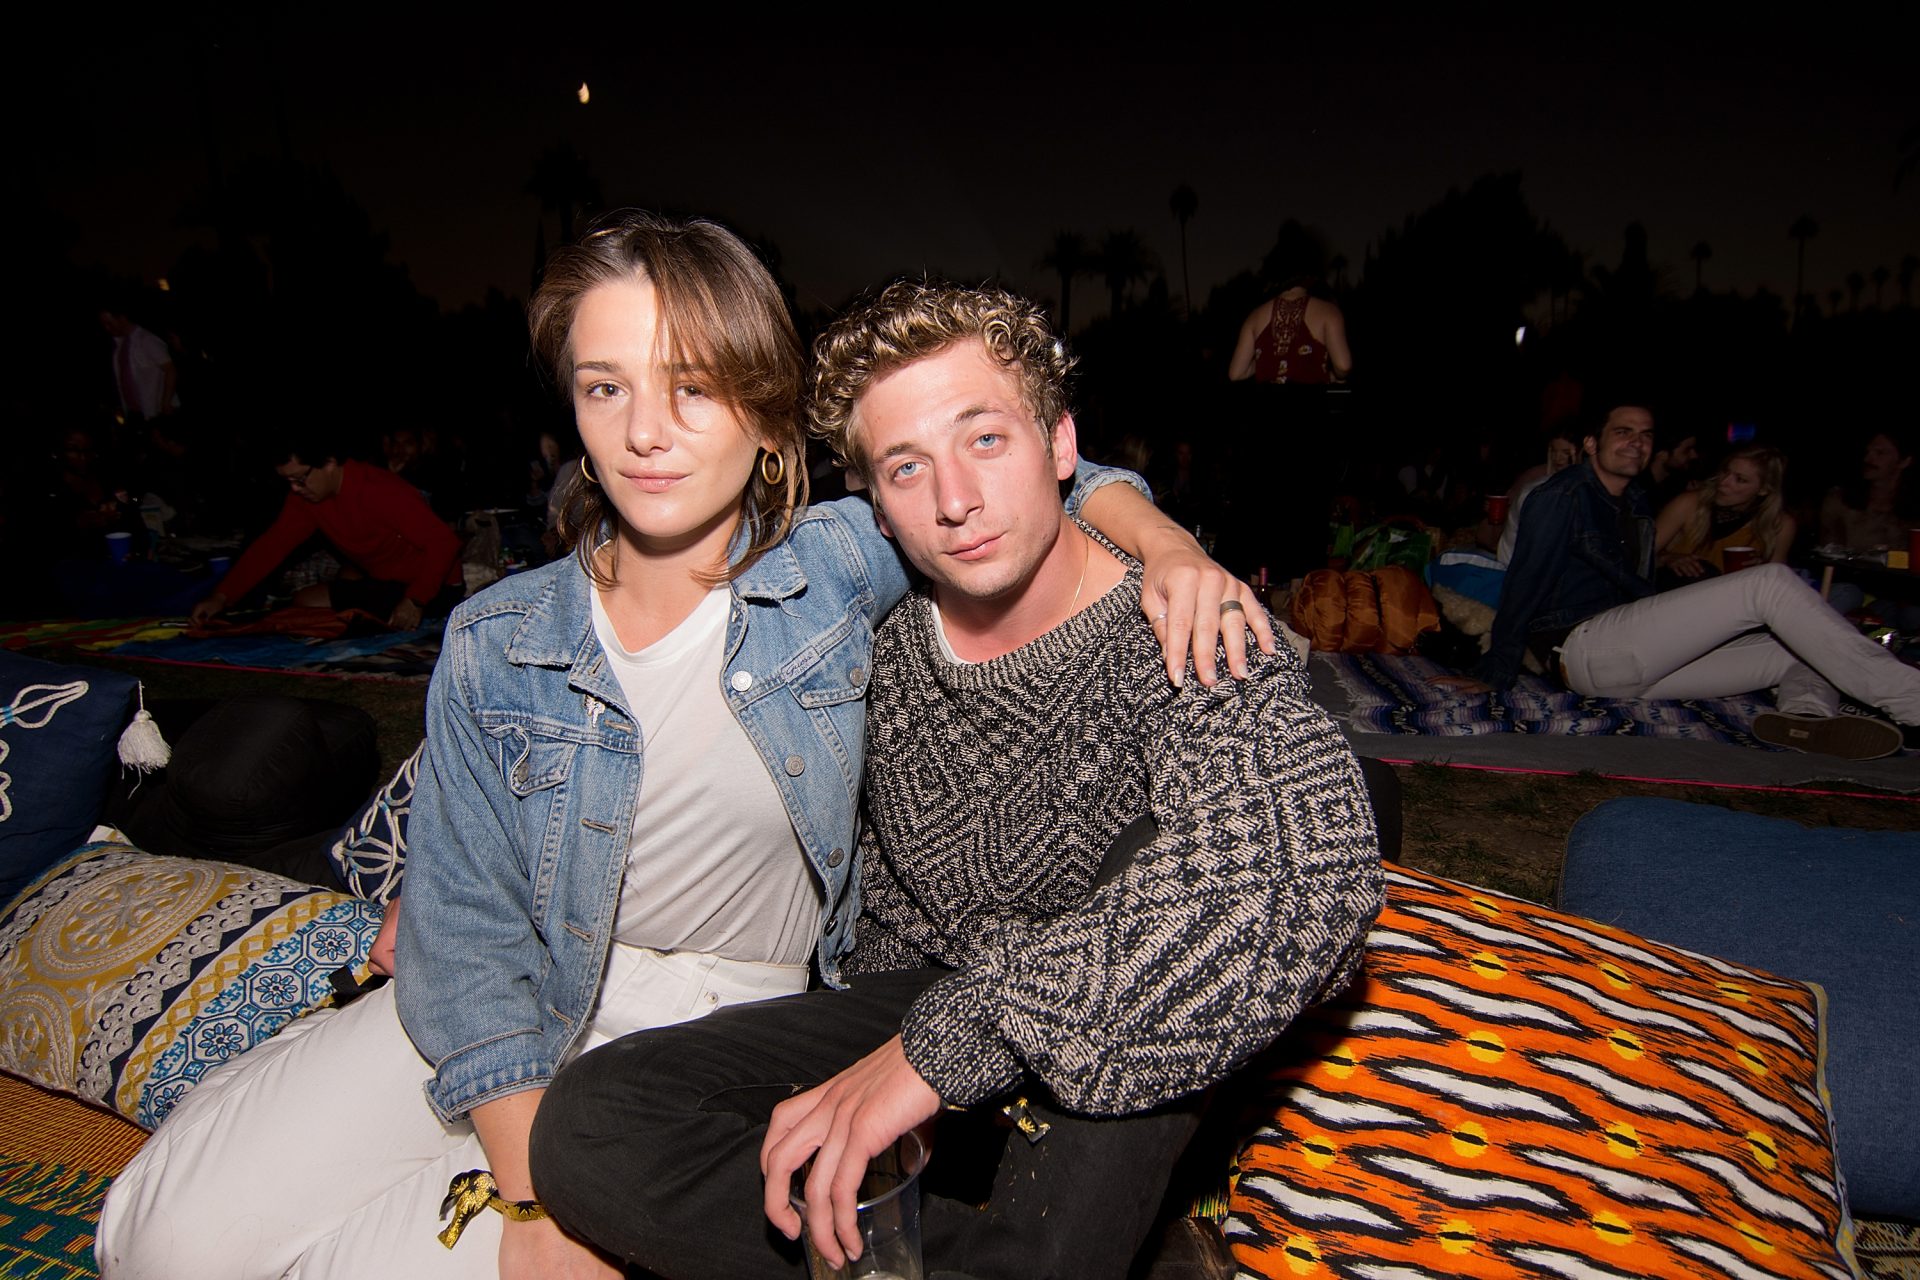 Jeremy Allen White must take an alcohol test to see his daughters